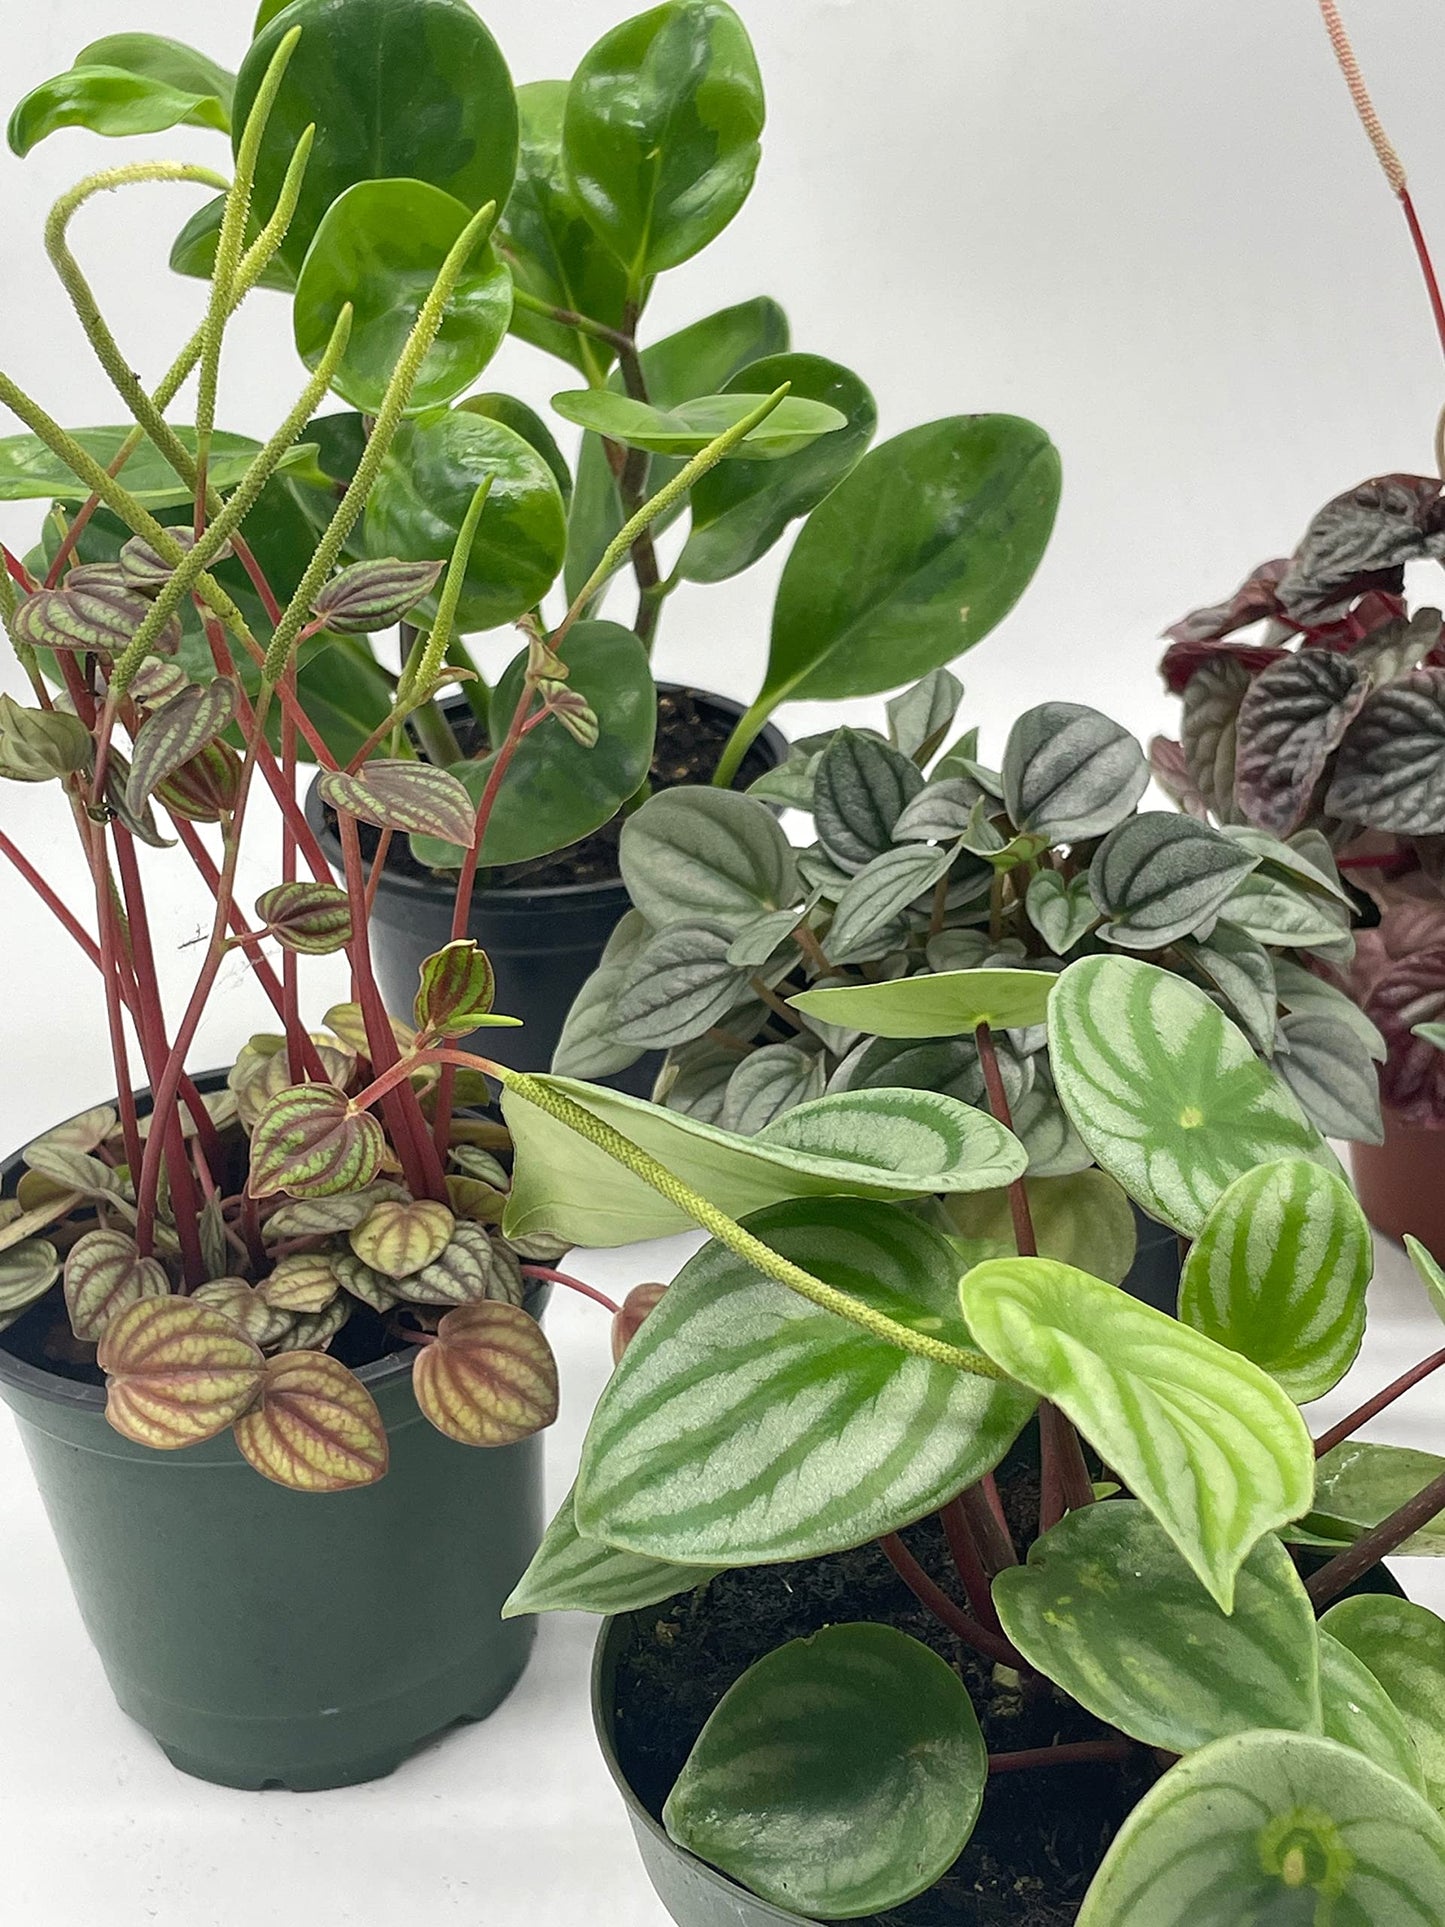 Peperomia Assortment Set, 4 inch pots, Watermelon, Marble, Ripple, Rosso, albviotta, carperata, Variety Assorted Collection